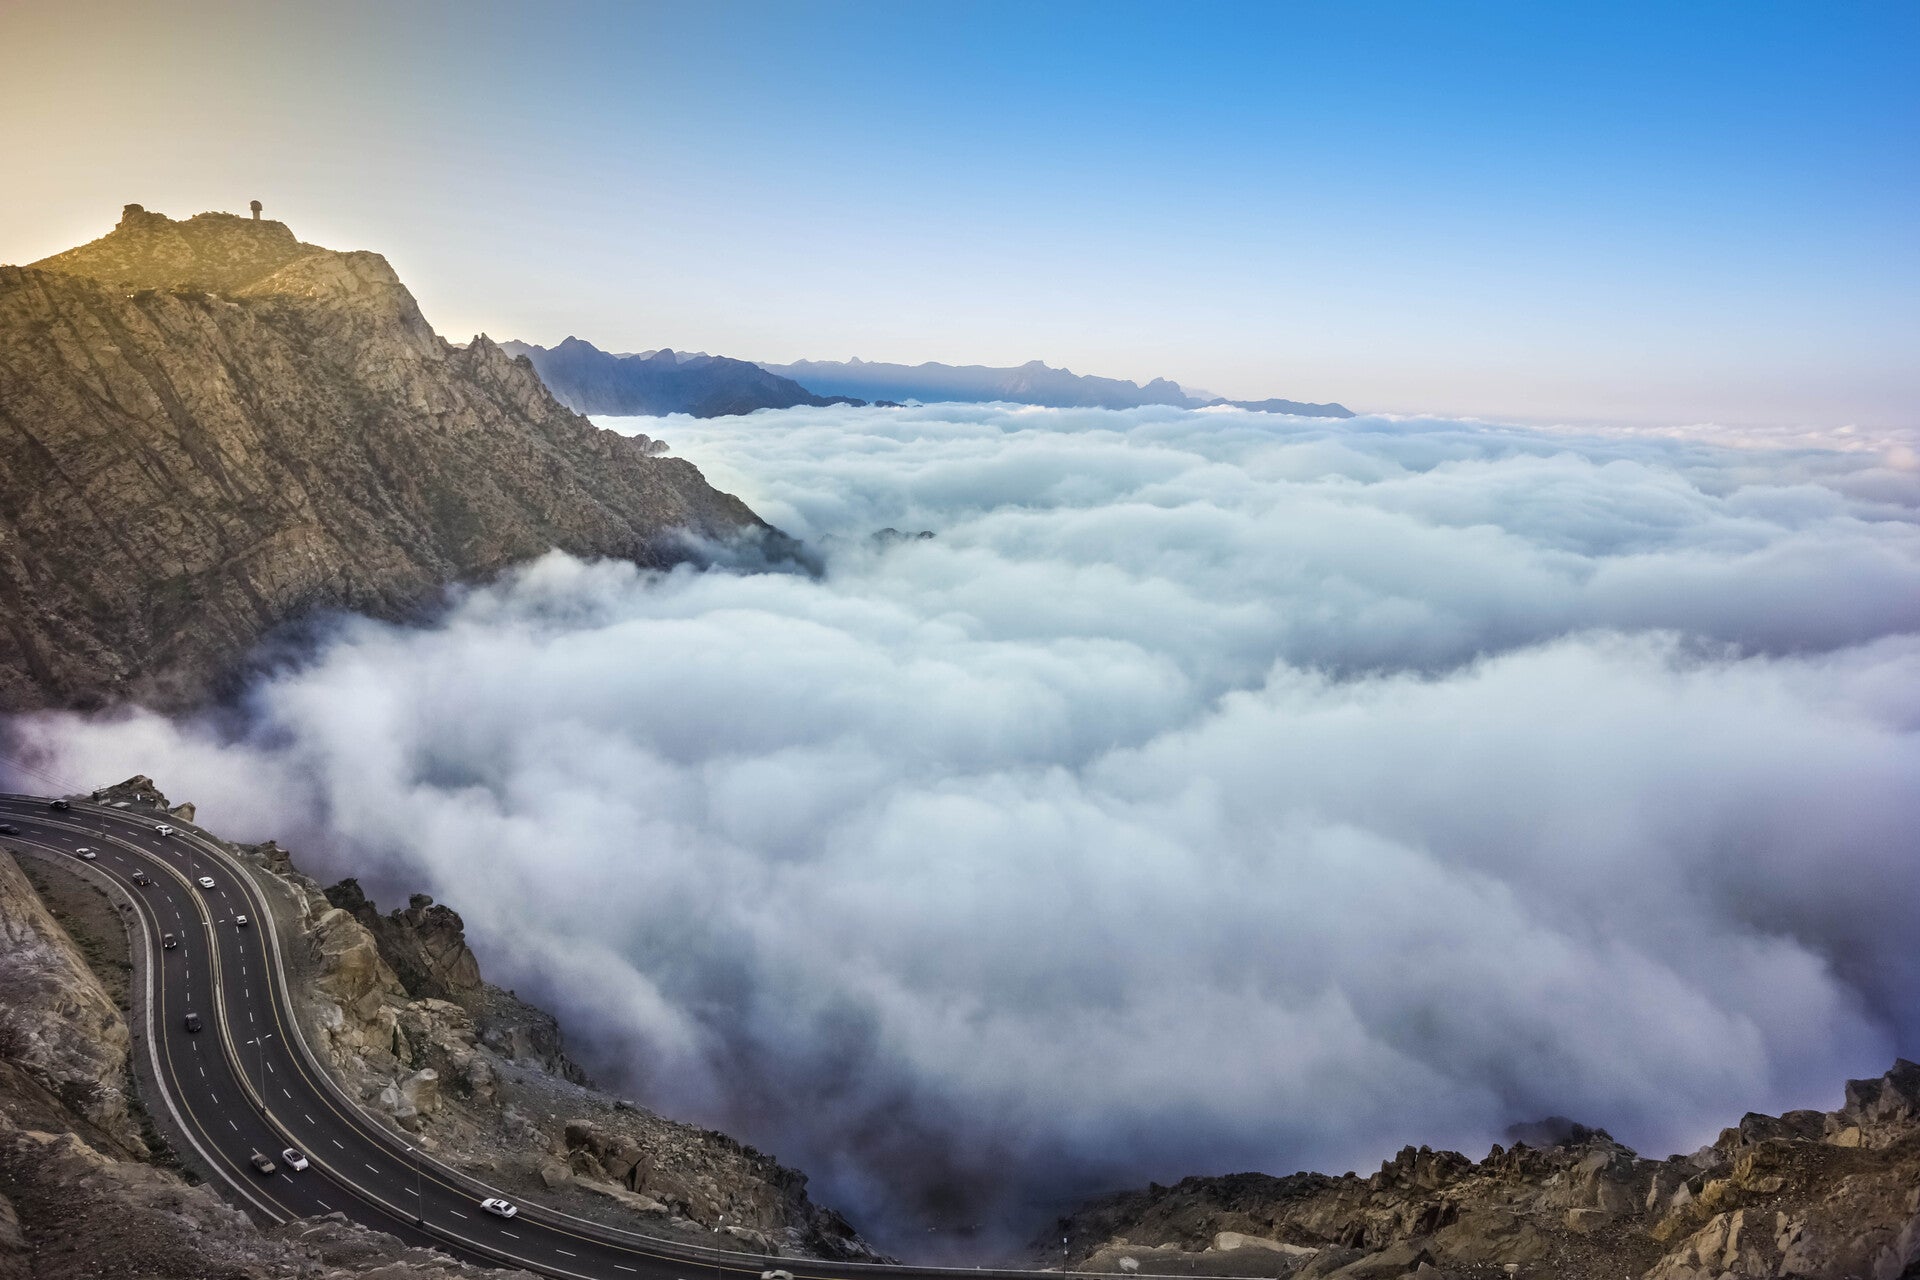 Enjoy a roadtrip with serious views with a drive through the dramatic landscape of Taif